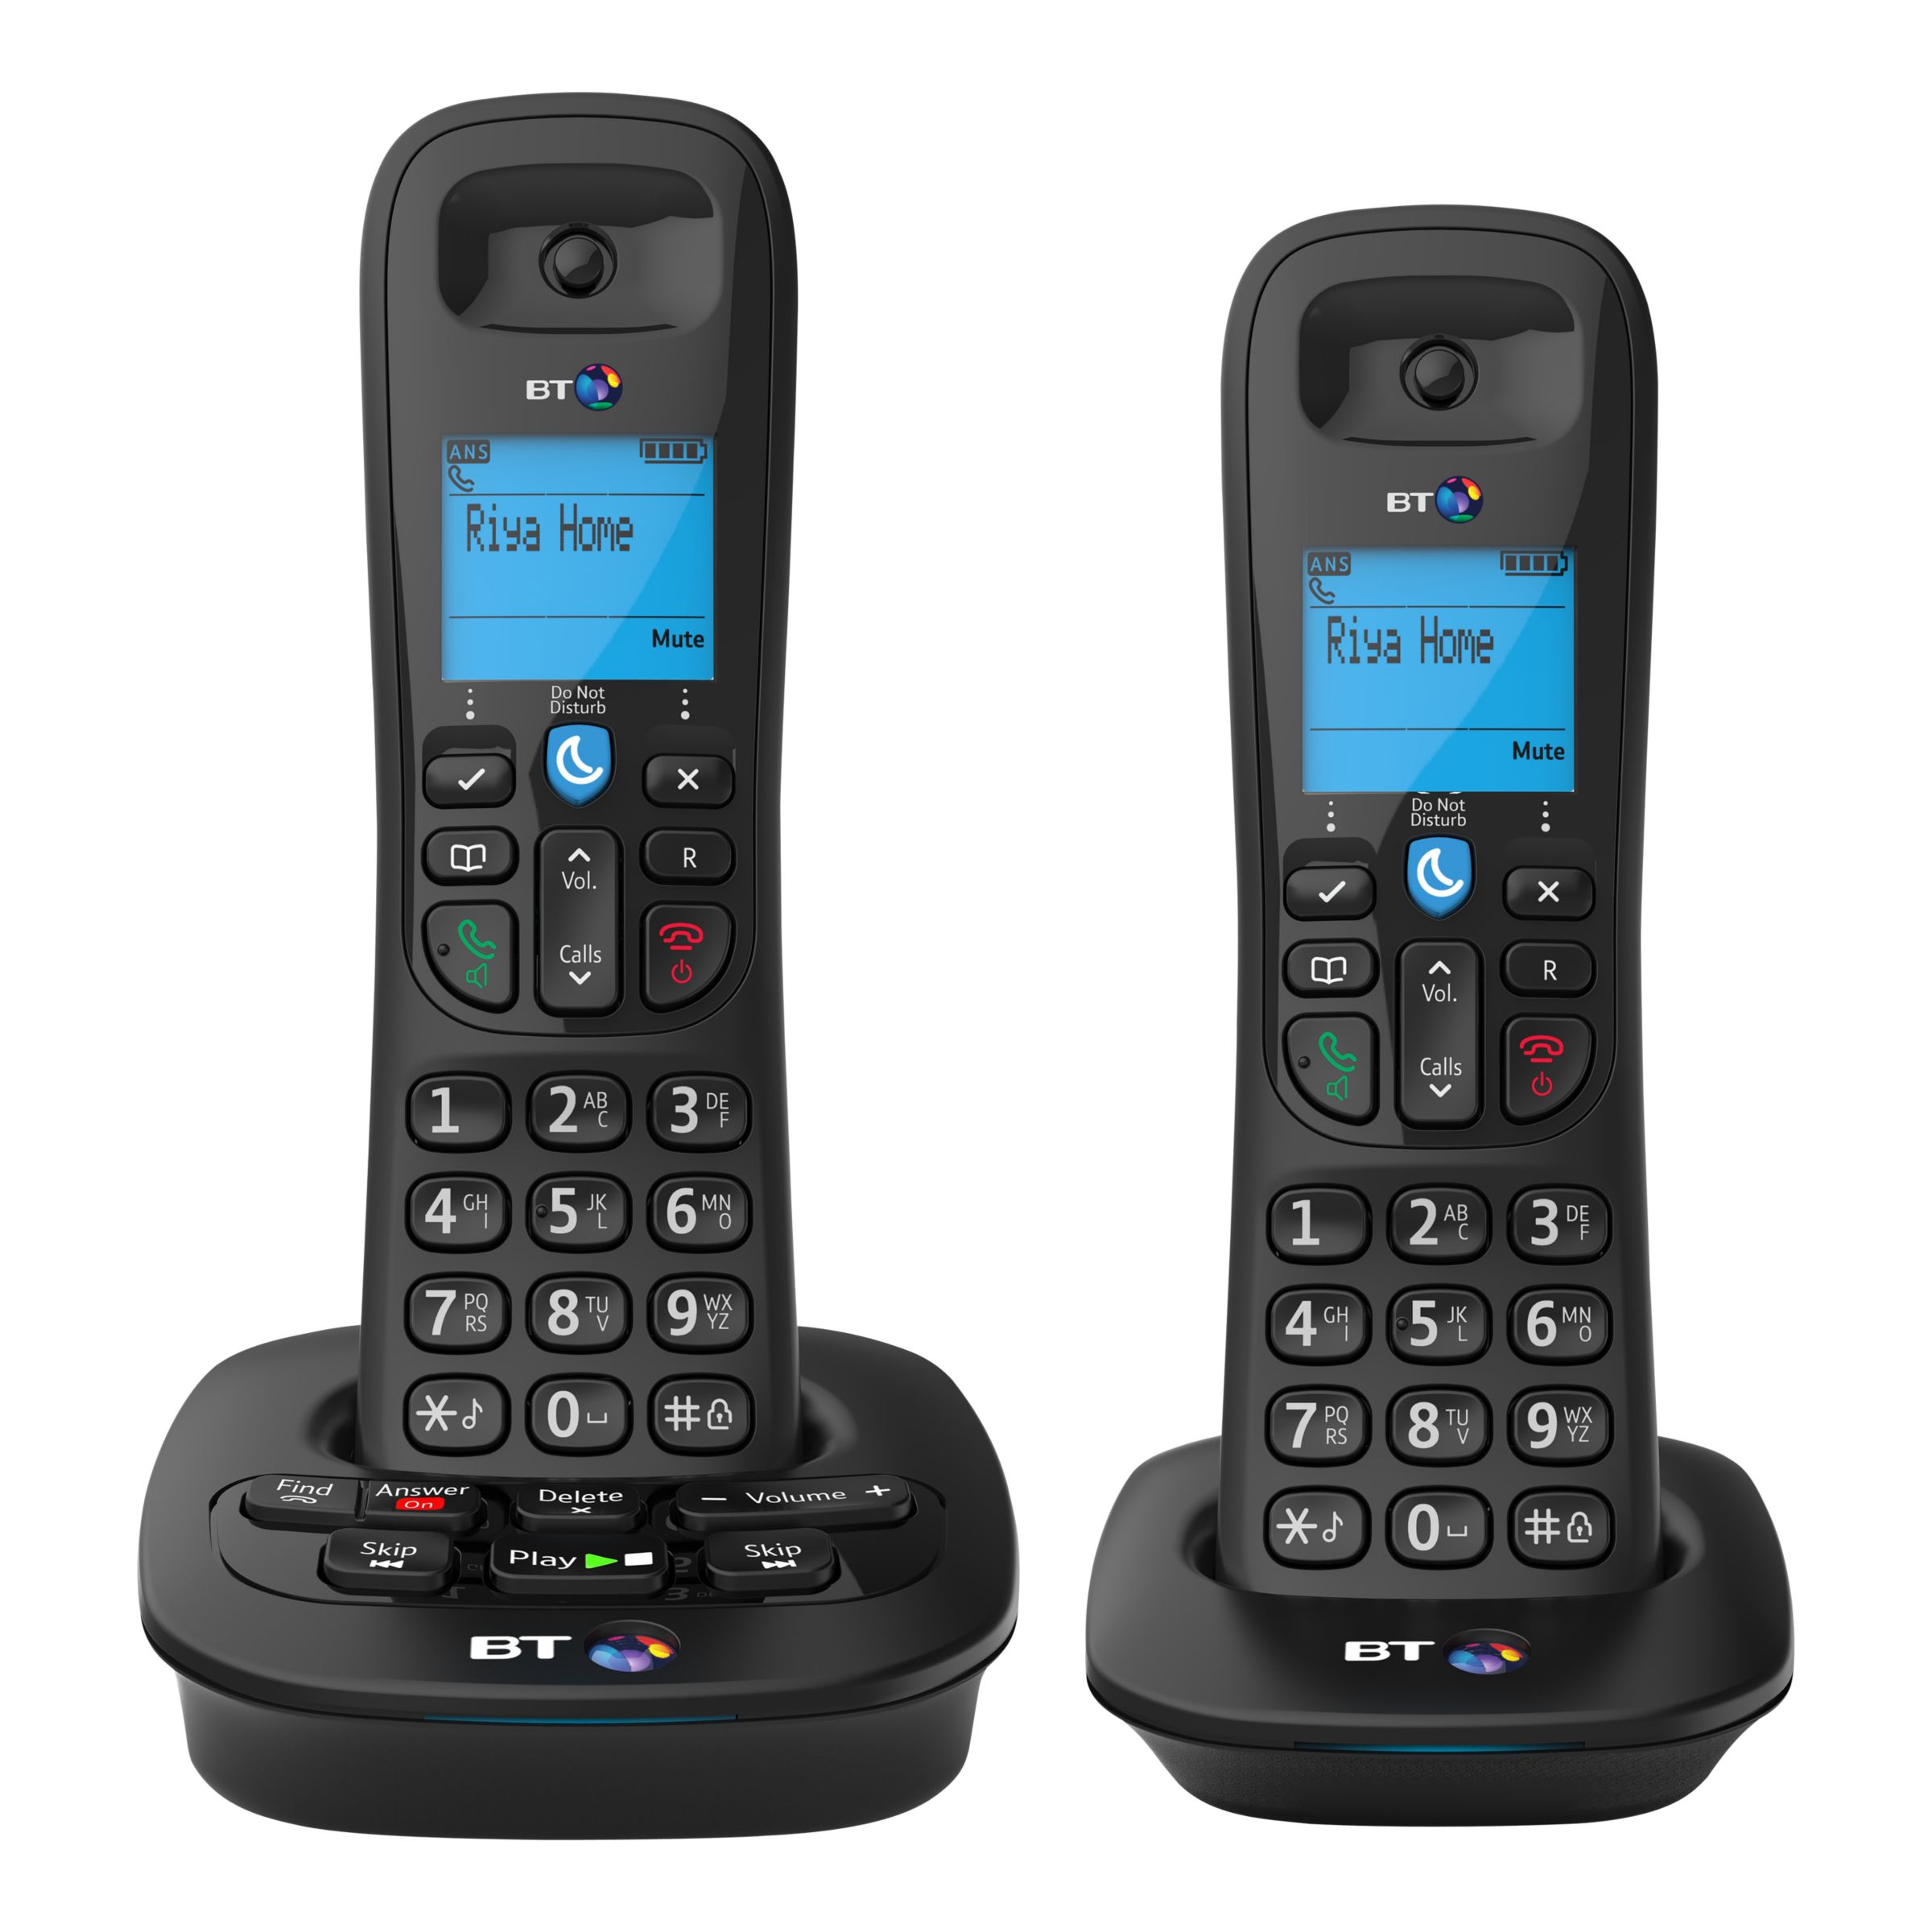 BT 3940 Digital Cordless Phone with Answering Machine, Twin DECT Review thumbnail